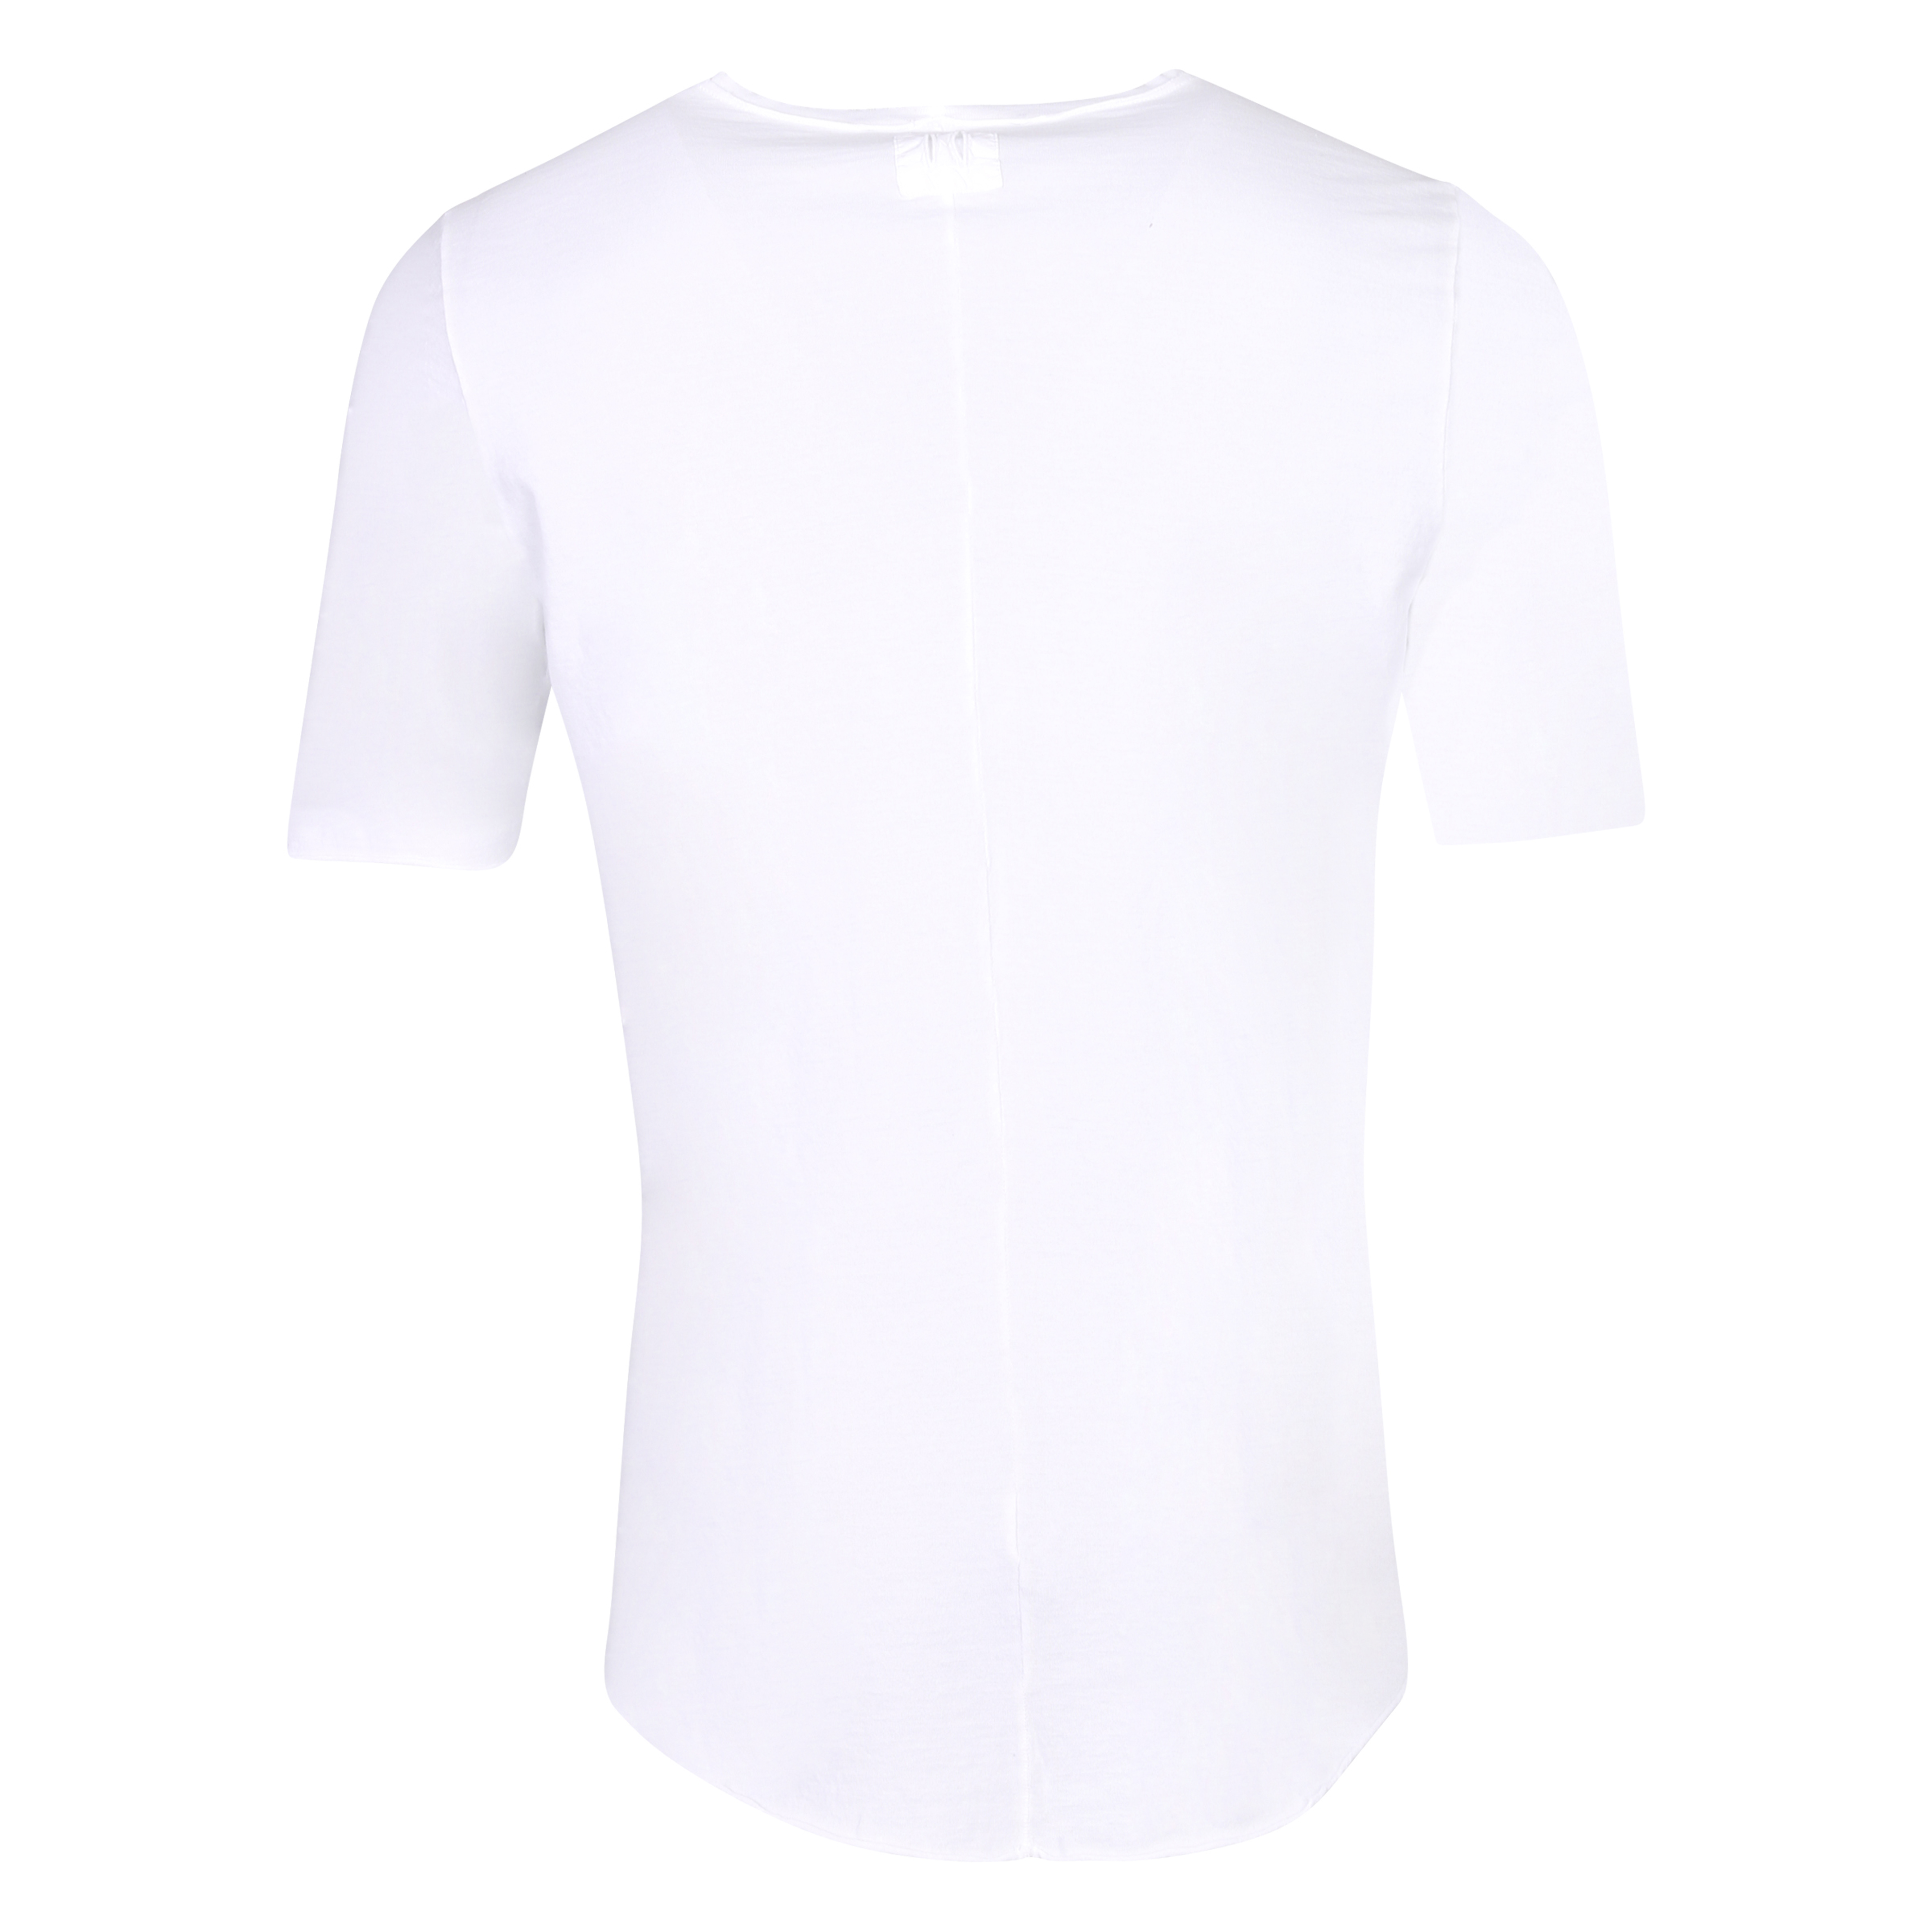 Hannes Roether Crewneck T-Shirt in White L